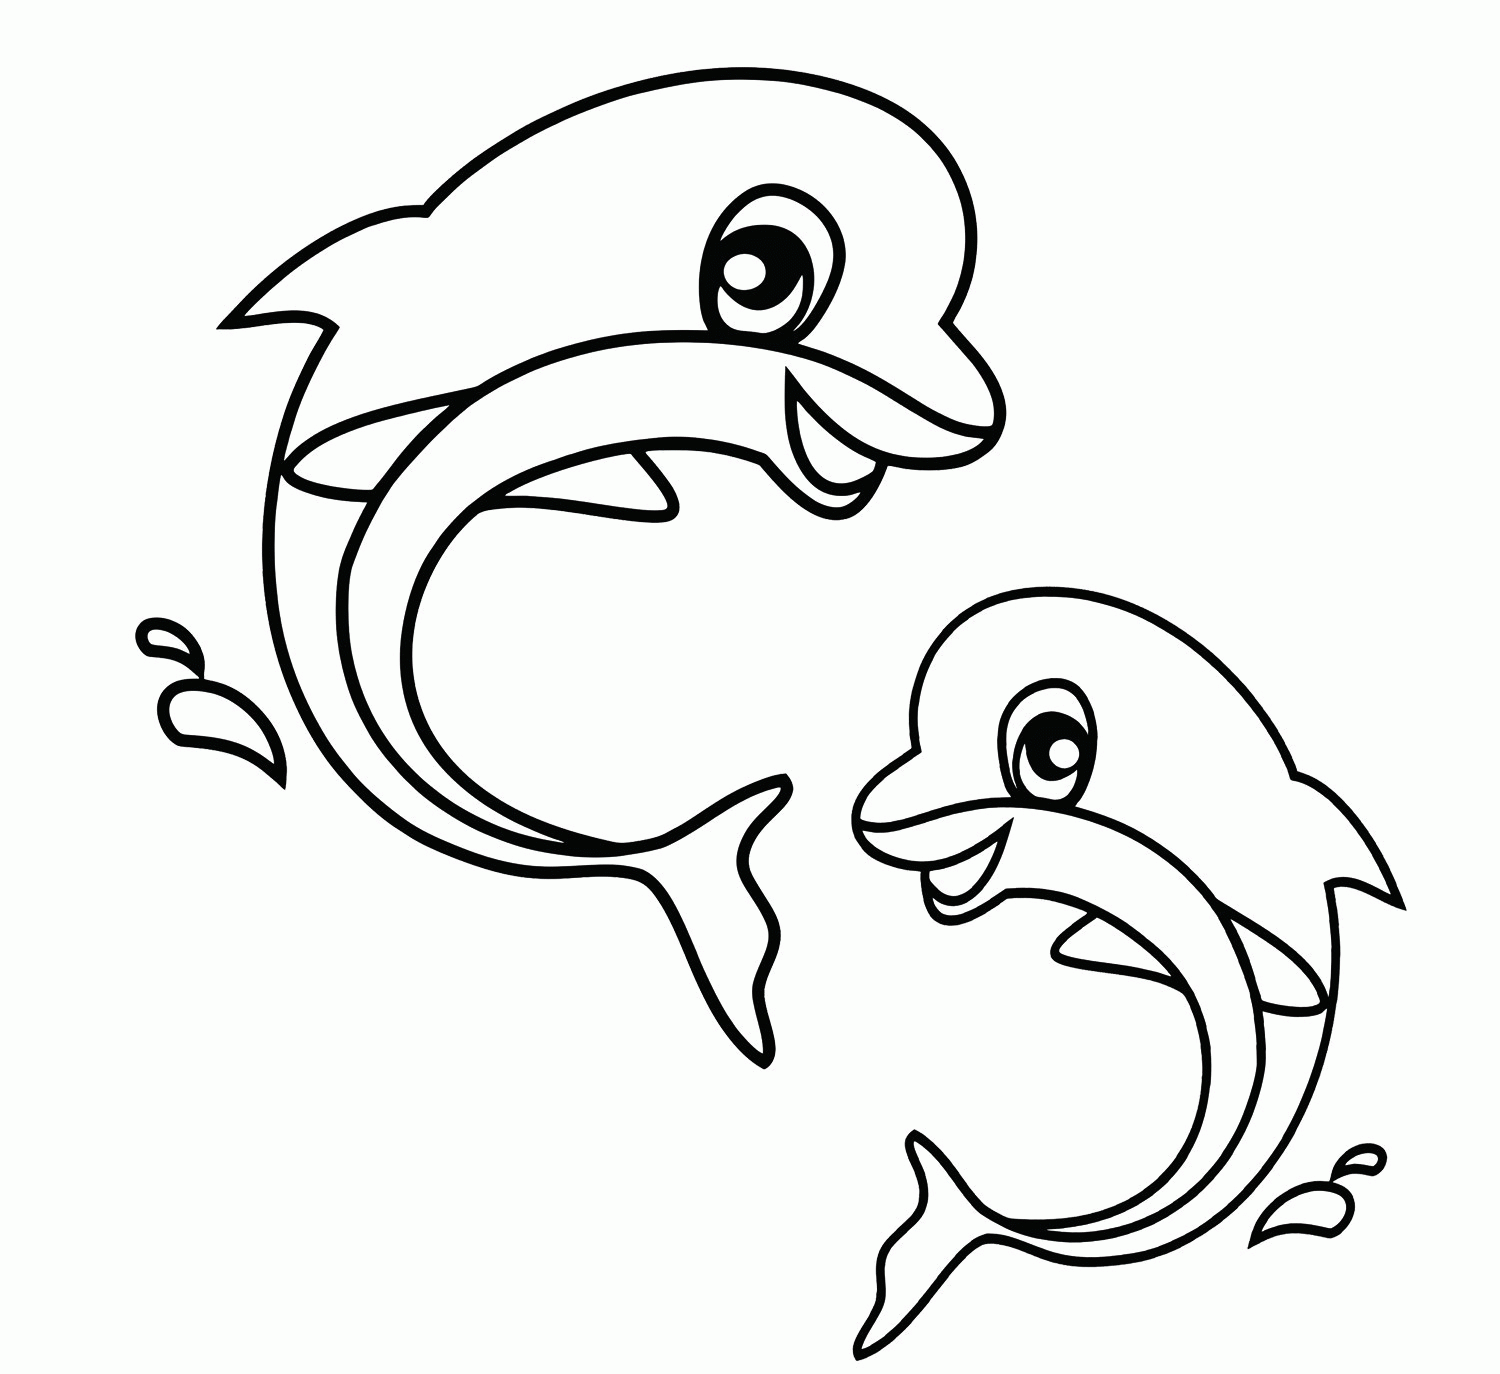 animal coloring pages for preschoolers - High Quality Coloring Pages